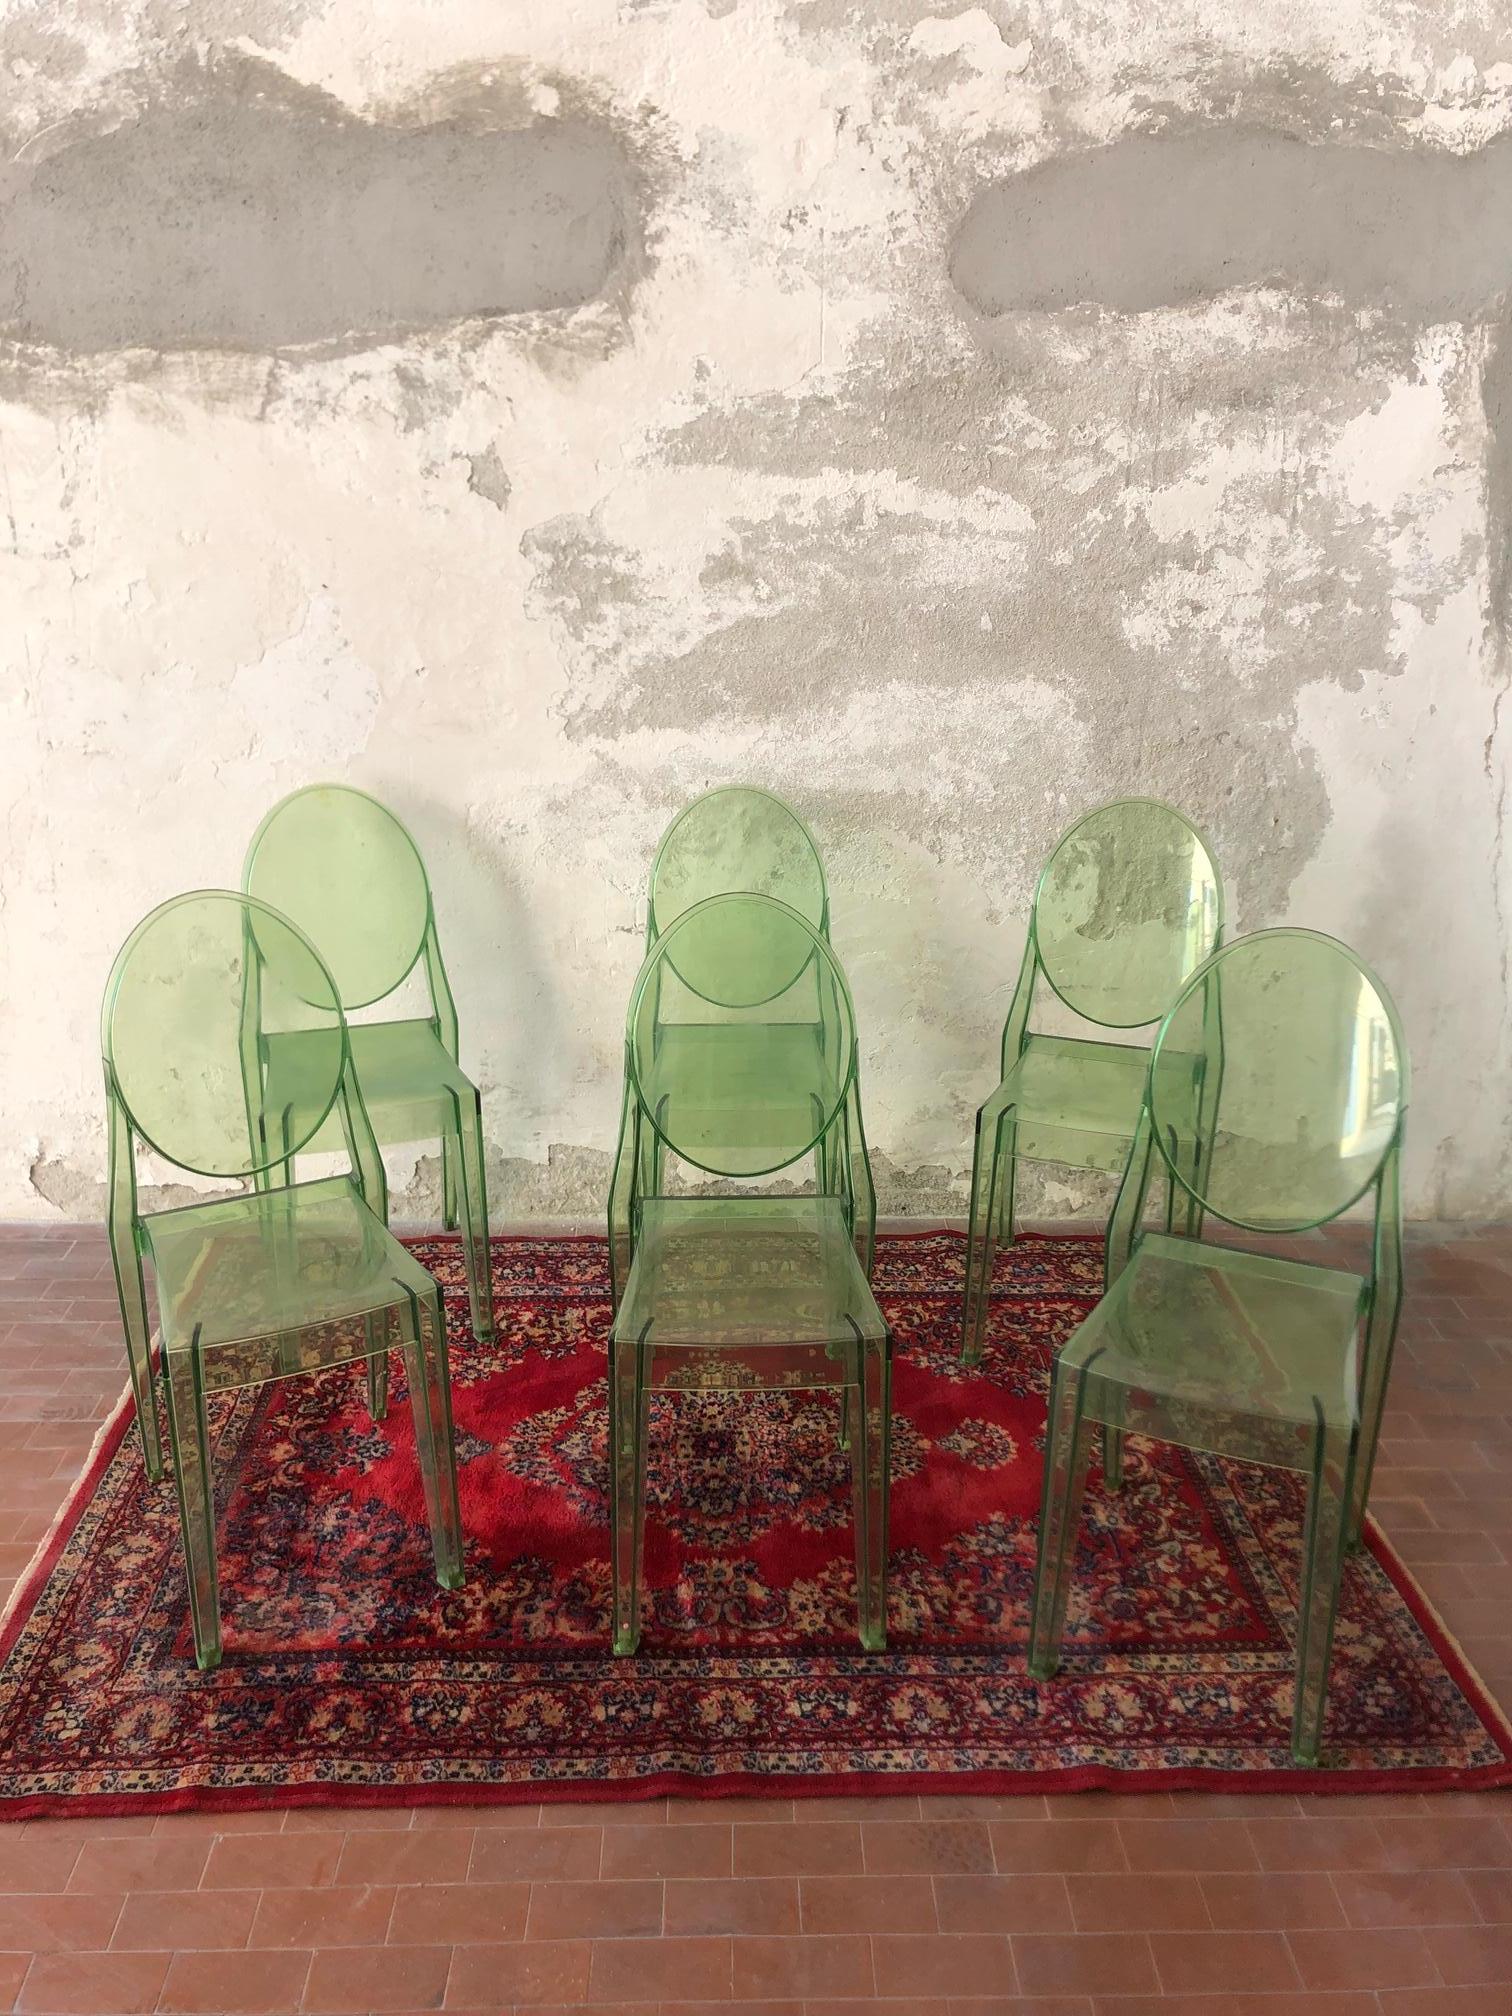 Set of 6 green transparent polycarbonate chairs, designed by Philippe starck and produced by Kartell with the name of Ghost chairs, are a used set with some small scratches from normal wear, sold in sets, ideal for a modern and colorful dining room